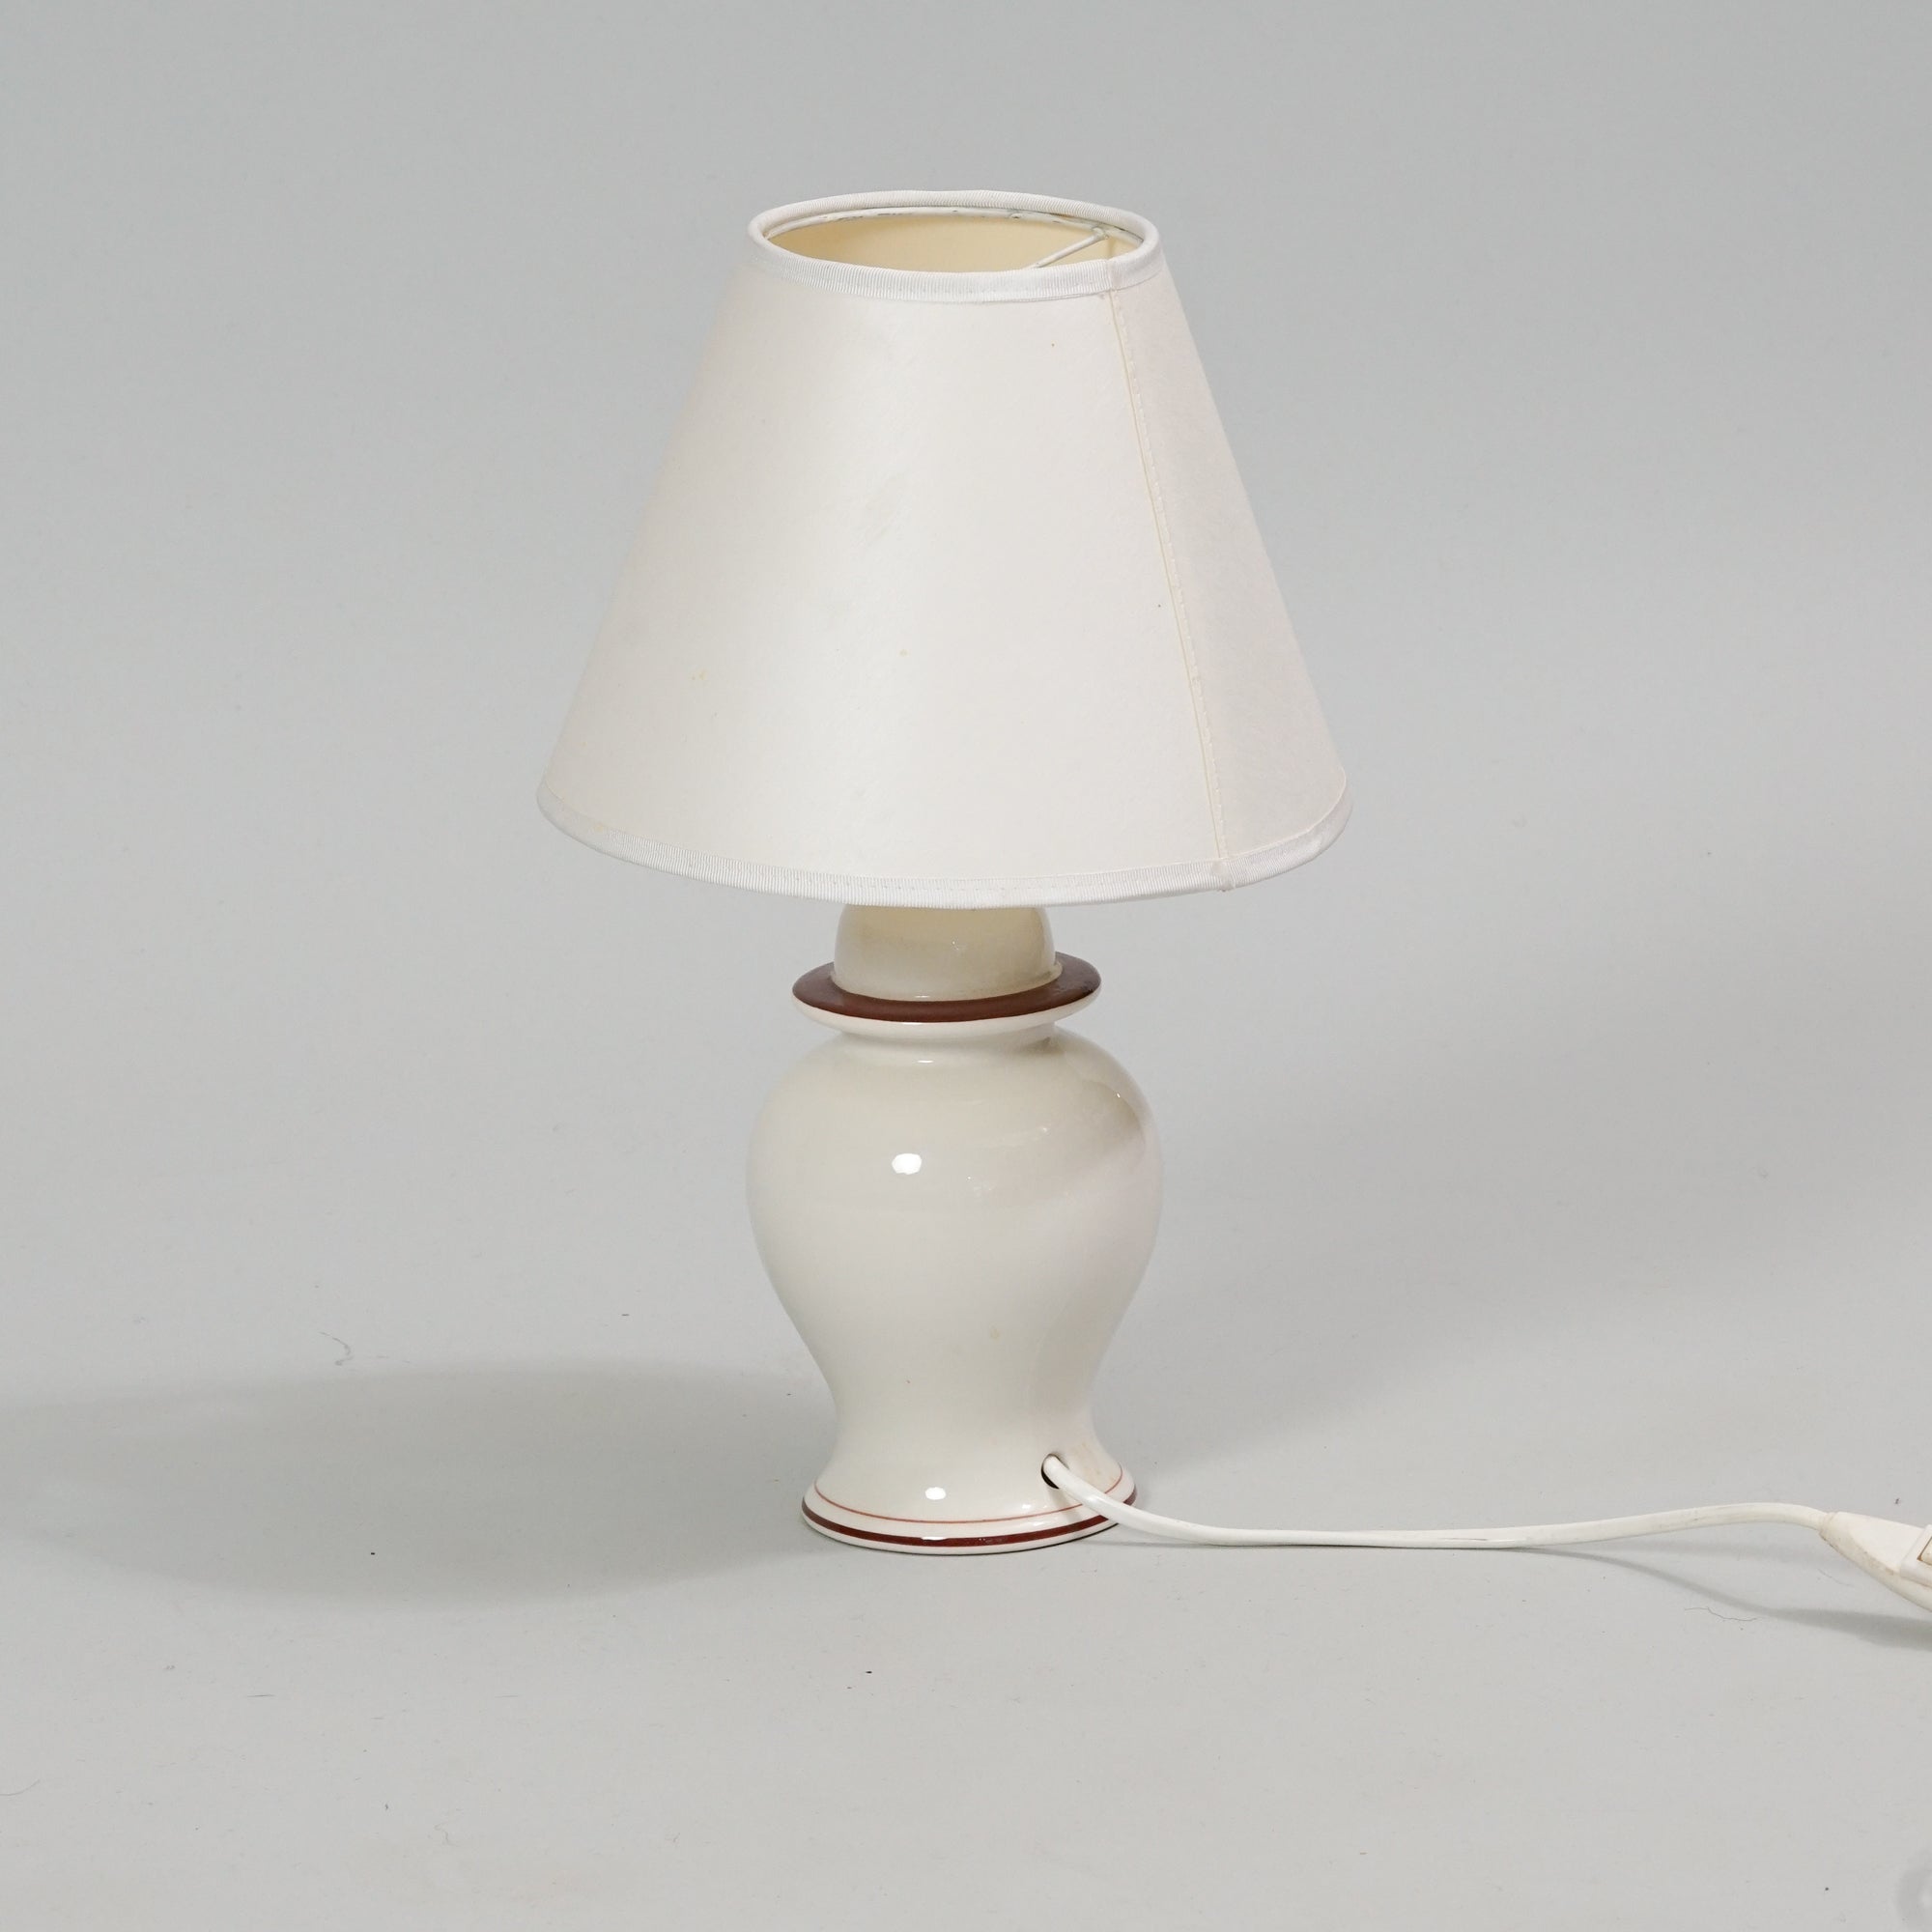 White porcelain lamp with red detailing on the base. The fabric shade is also white.